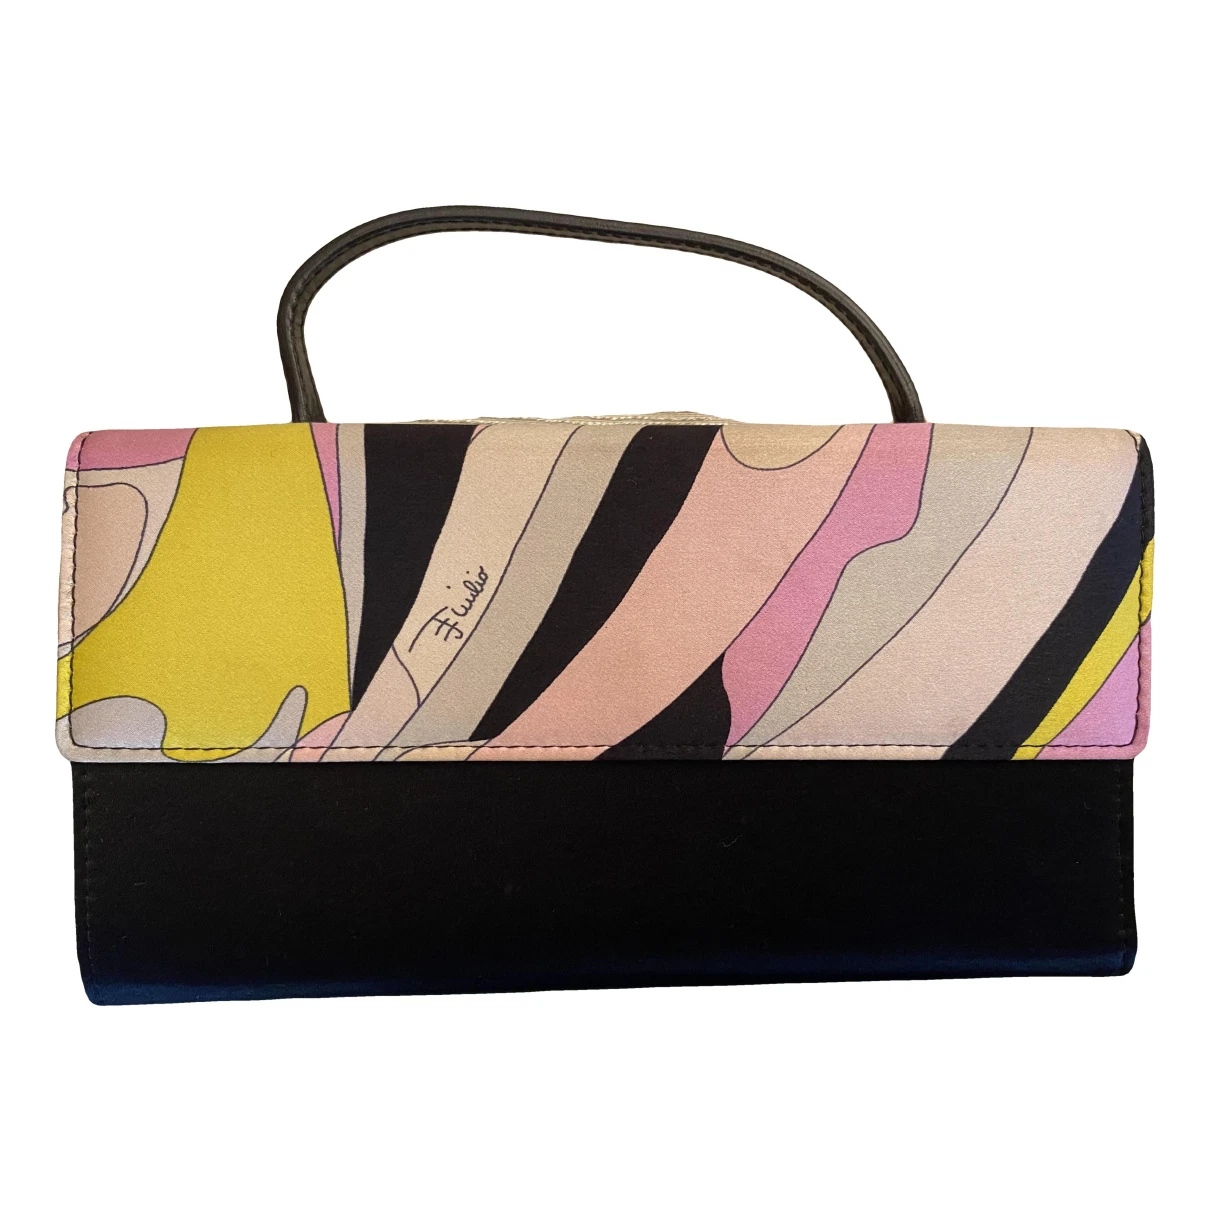 bags Emilio Pucci clutch bags for Female Silk. Used condition